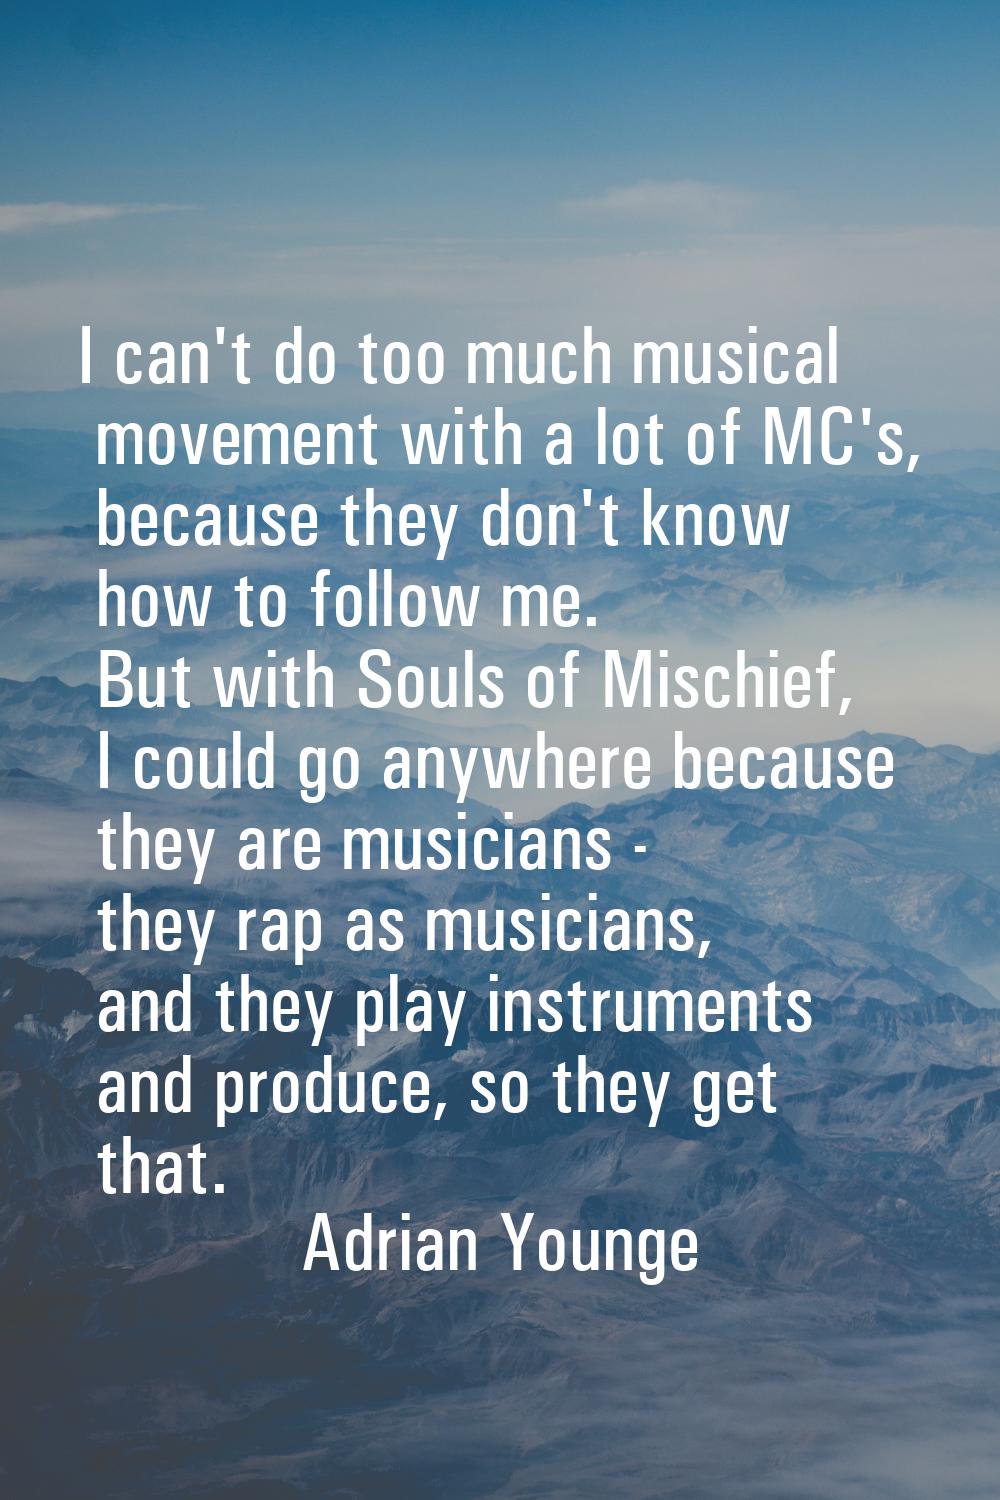 I can't do too much musical movement with a lot of MC's, because they don't know how to follow me. 